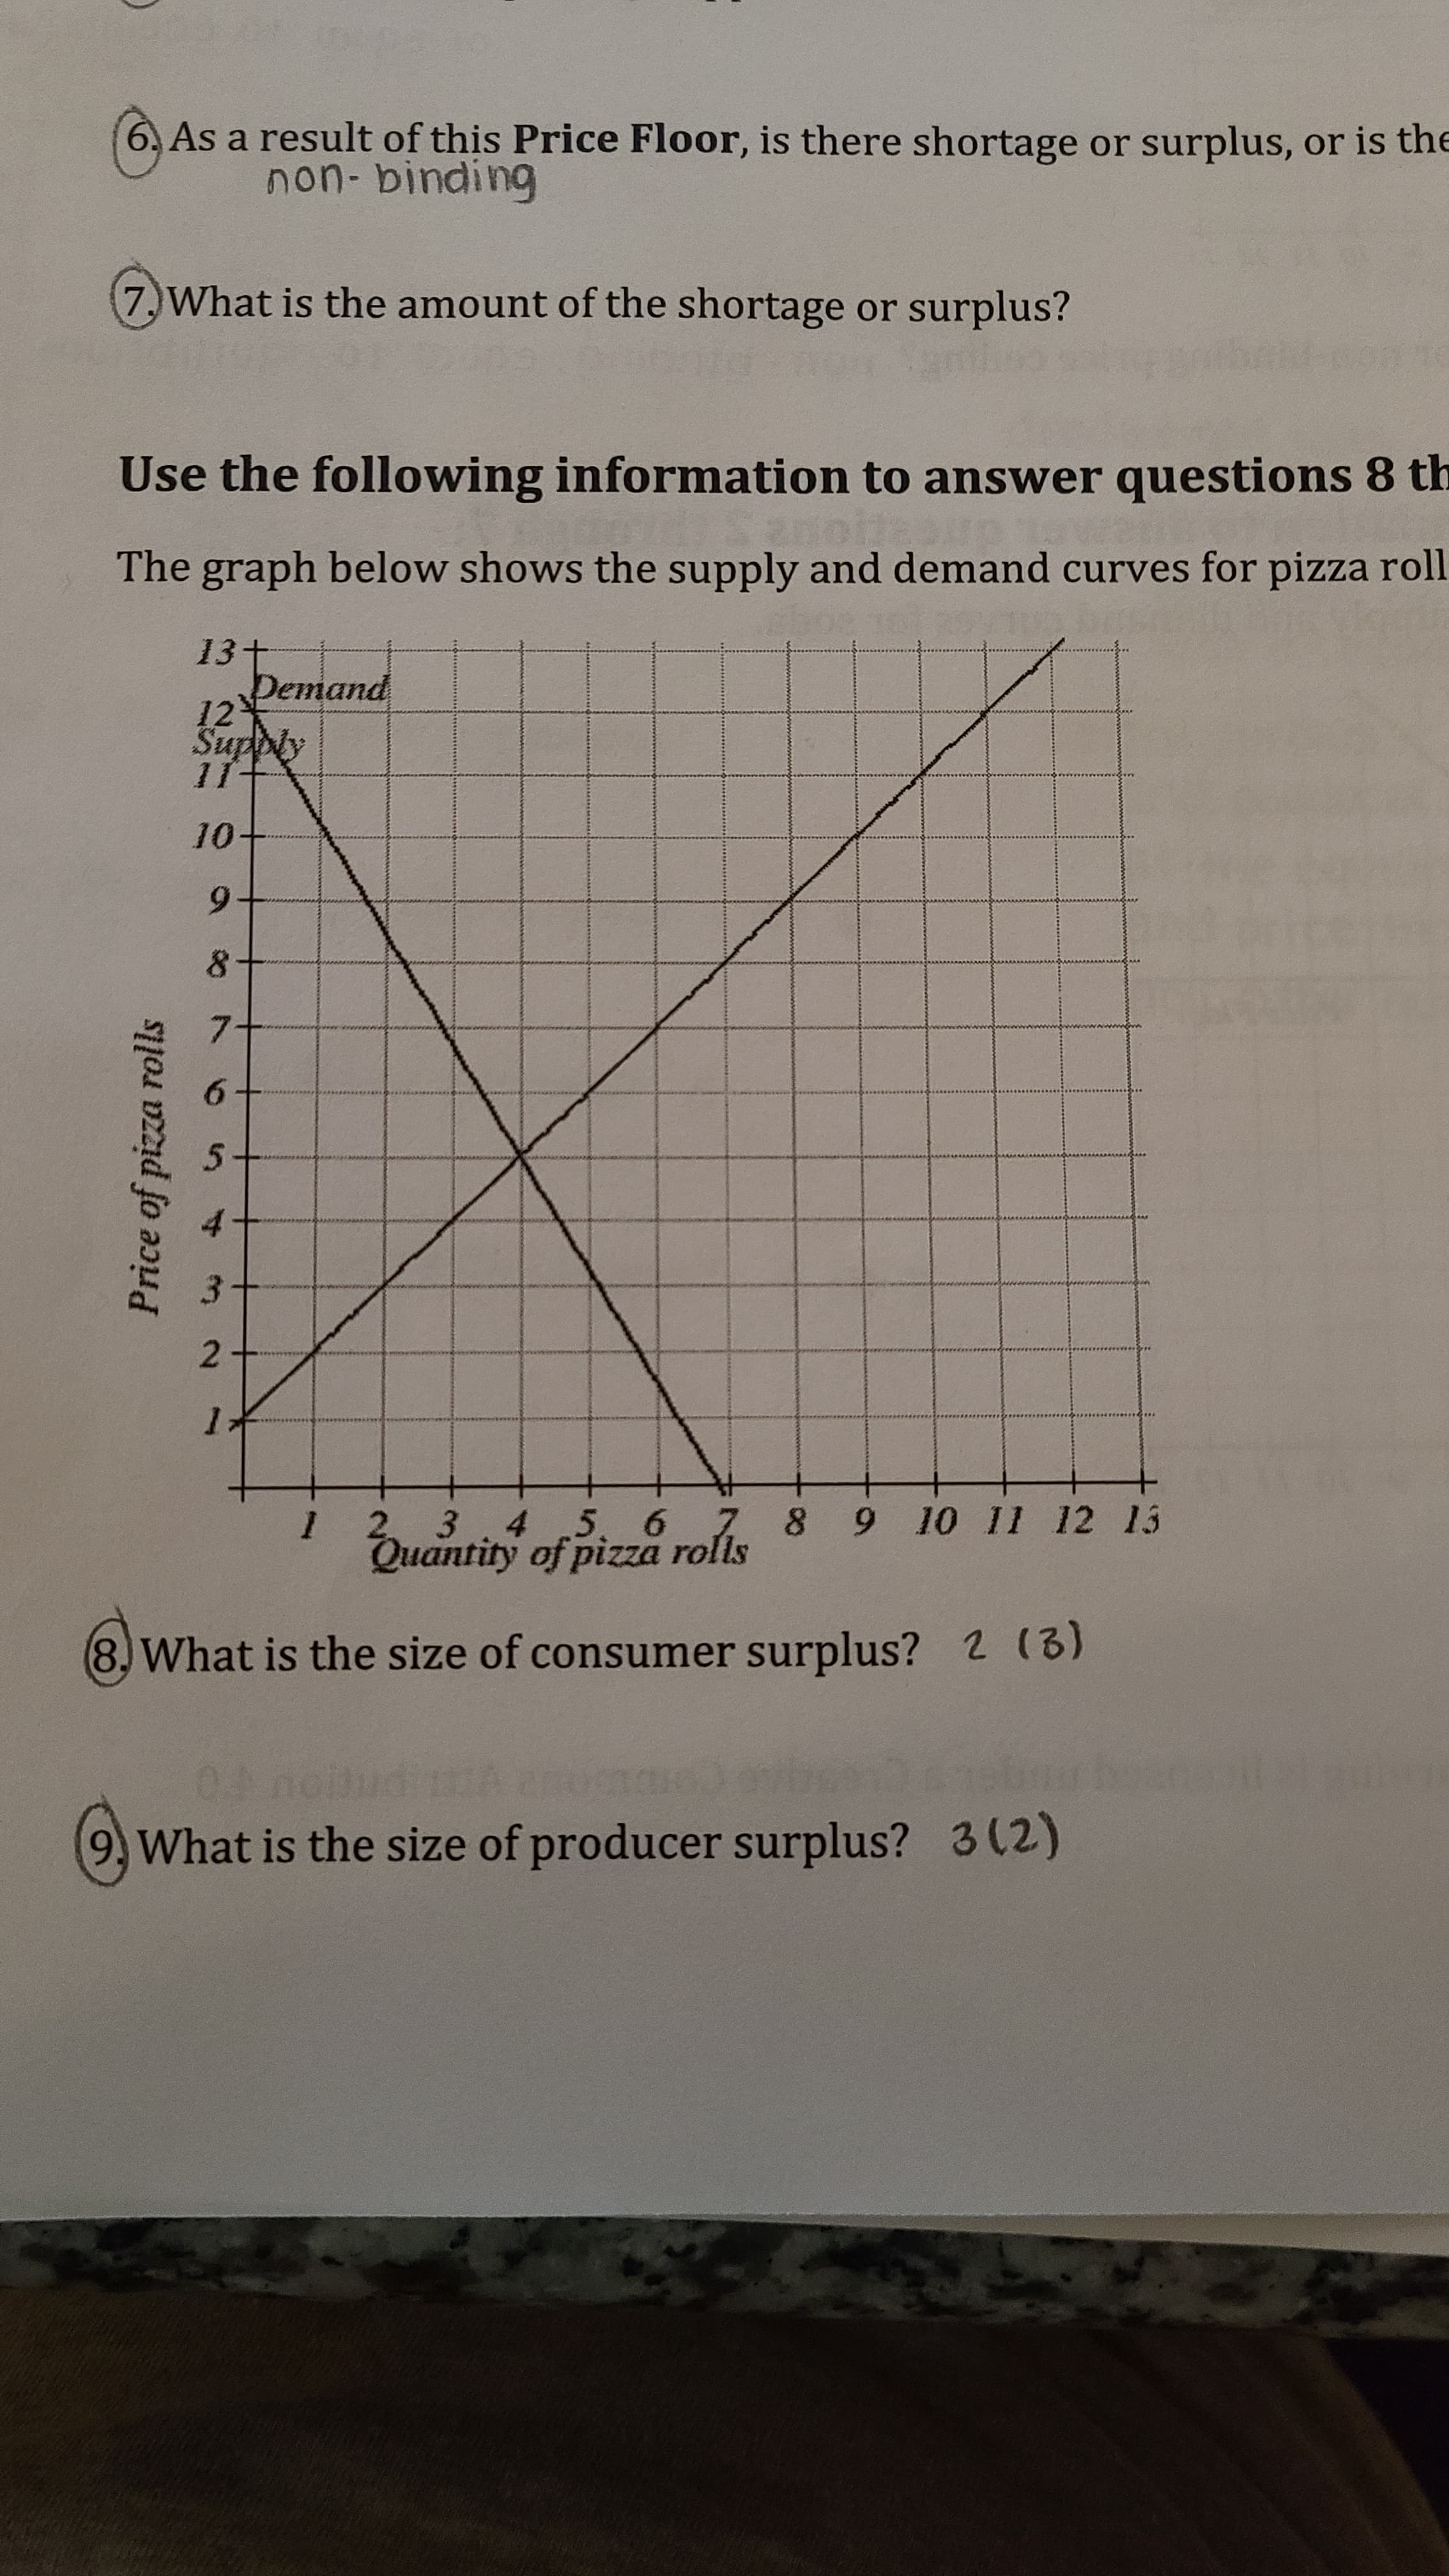 The graph below shows the supply and demand curves
13+
Demand
12
Supply
11
10
6.
7.
-
6.
2 3.4 5, 6
7 8
9 10 11 12 13
Quantity of pizza rolls
(8, What is the size of consumer surplus? 2 (3)
Price of pizza rolls
